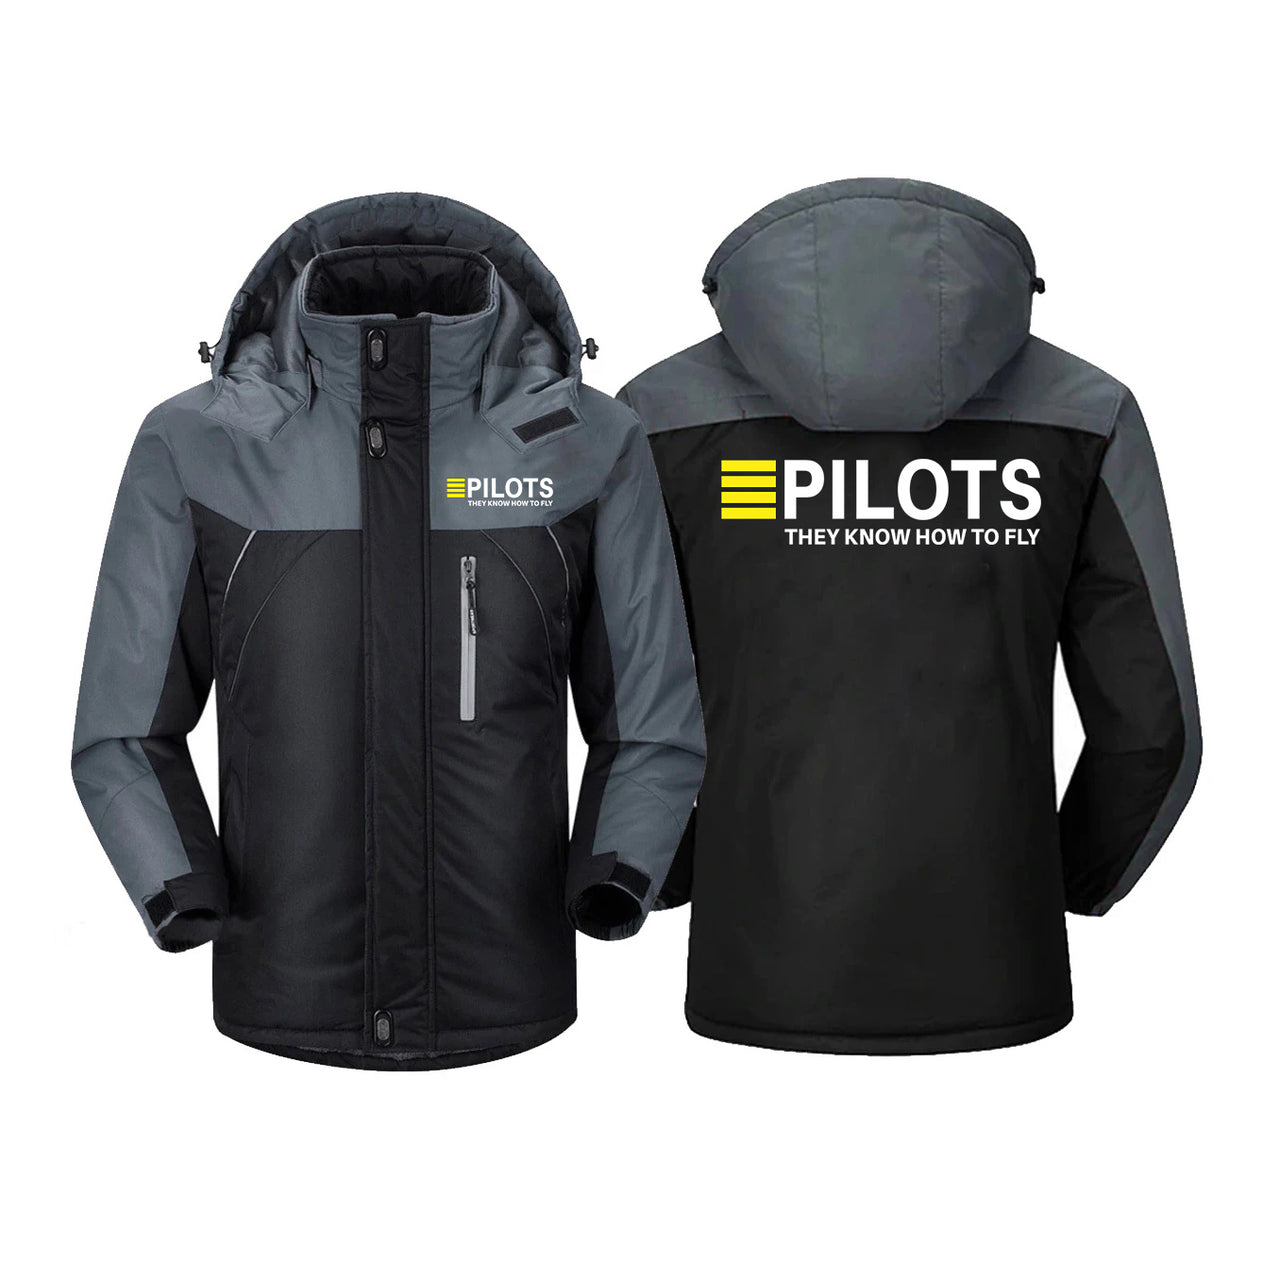 Pilots They Know How To Fly Designed Thick Winter Jackets